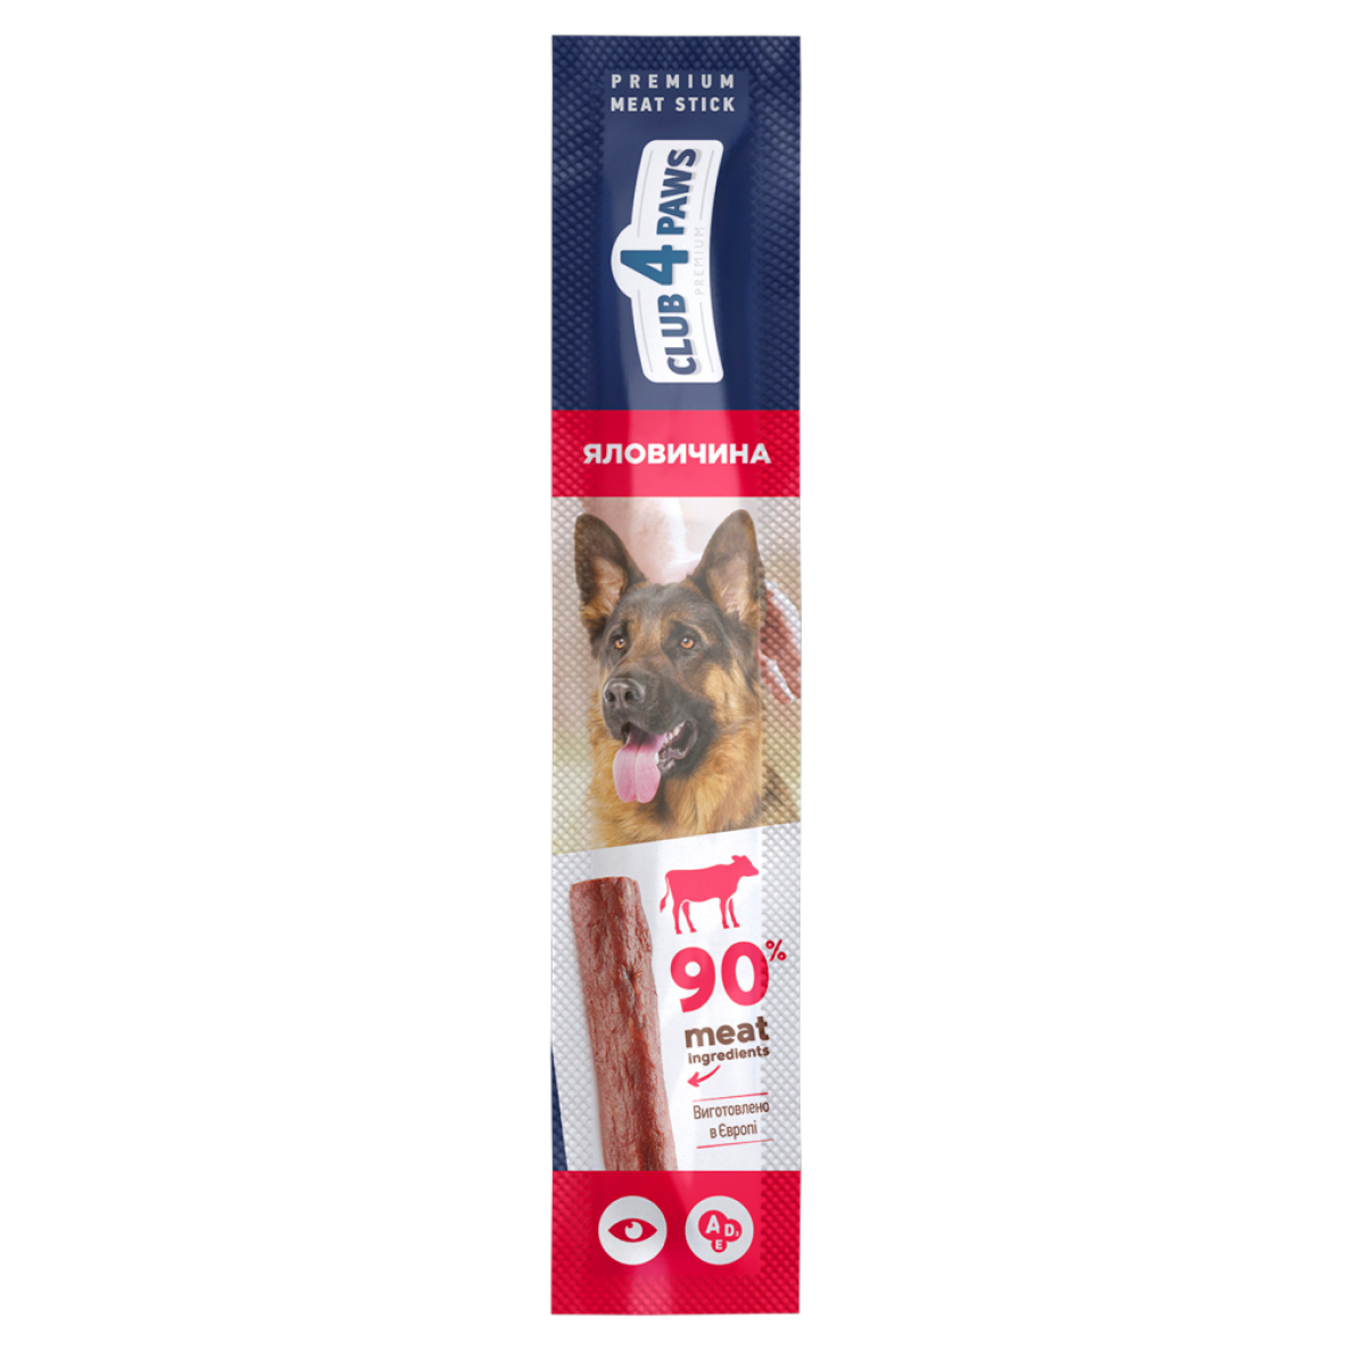 Delicacies Club 4 paws Premium Meat Stick beef for dogs12g